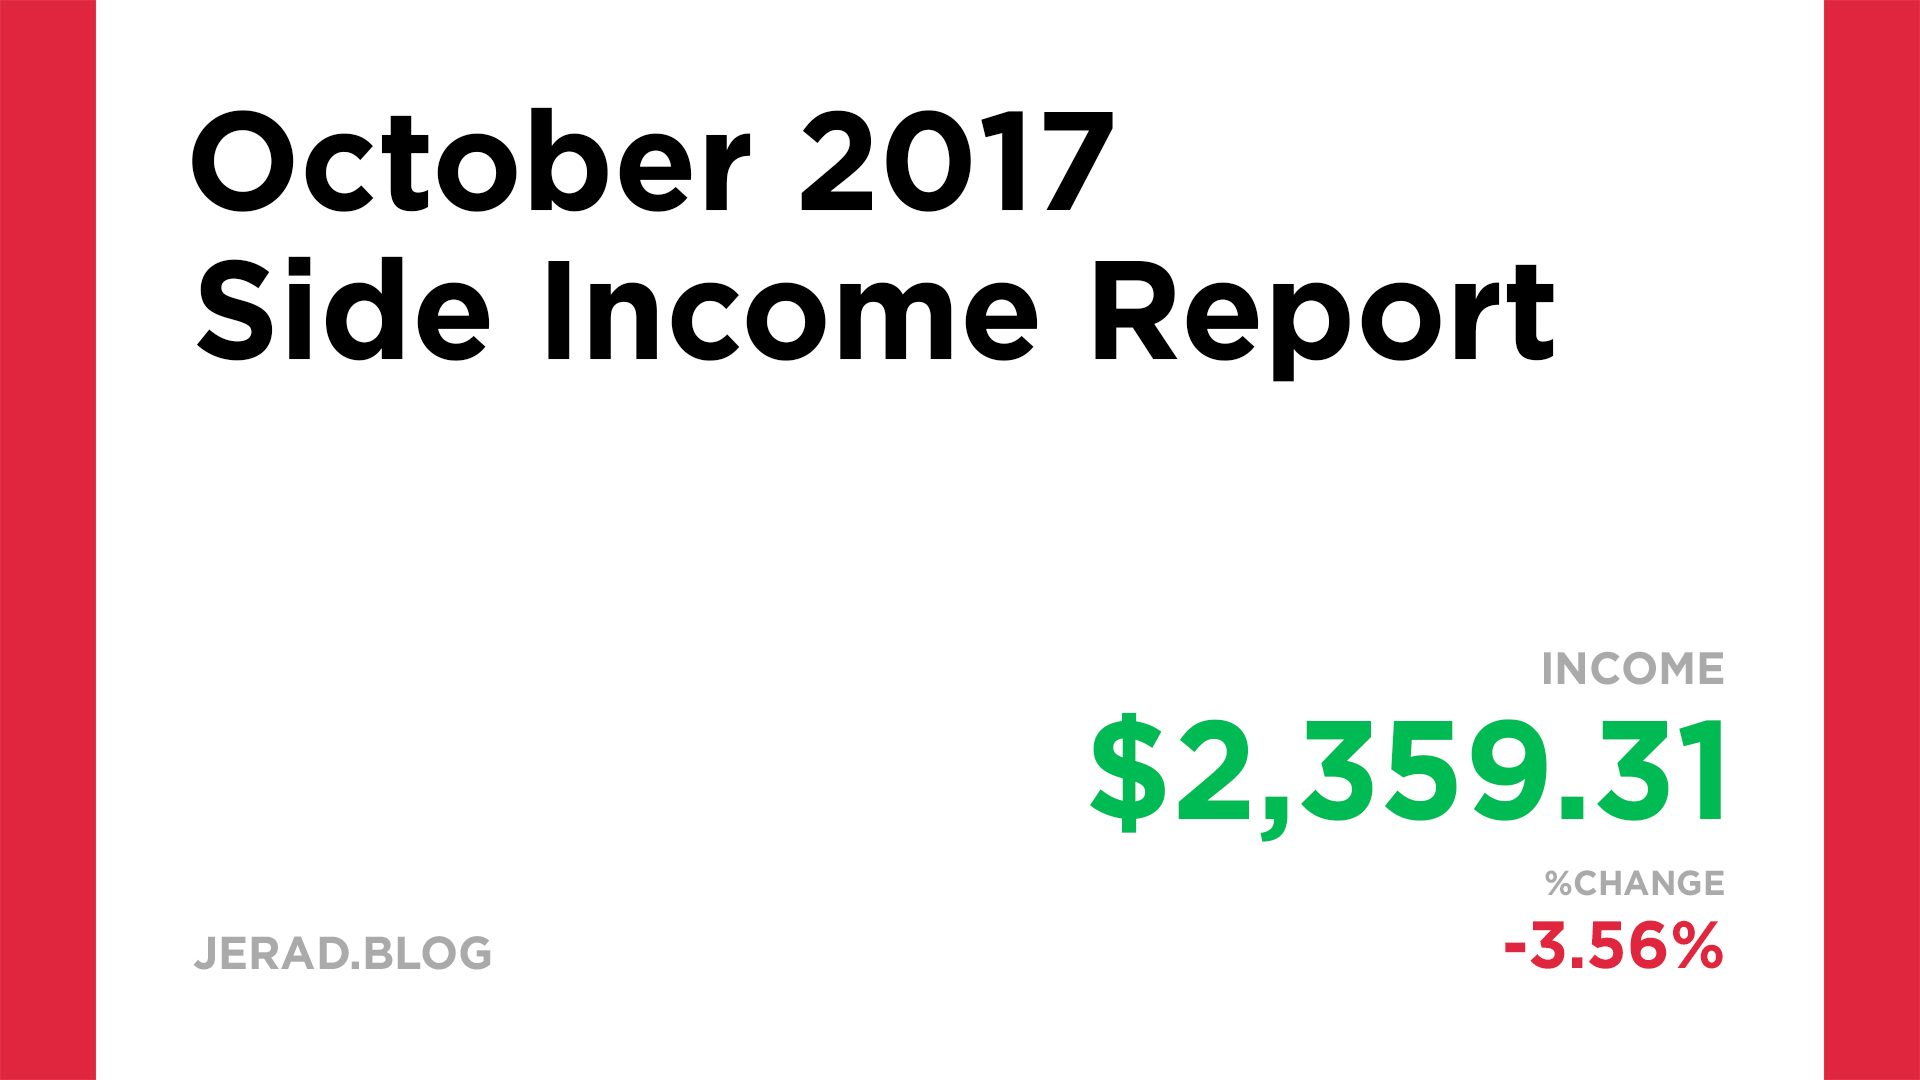 October 2017 Side Income Report